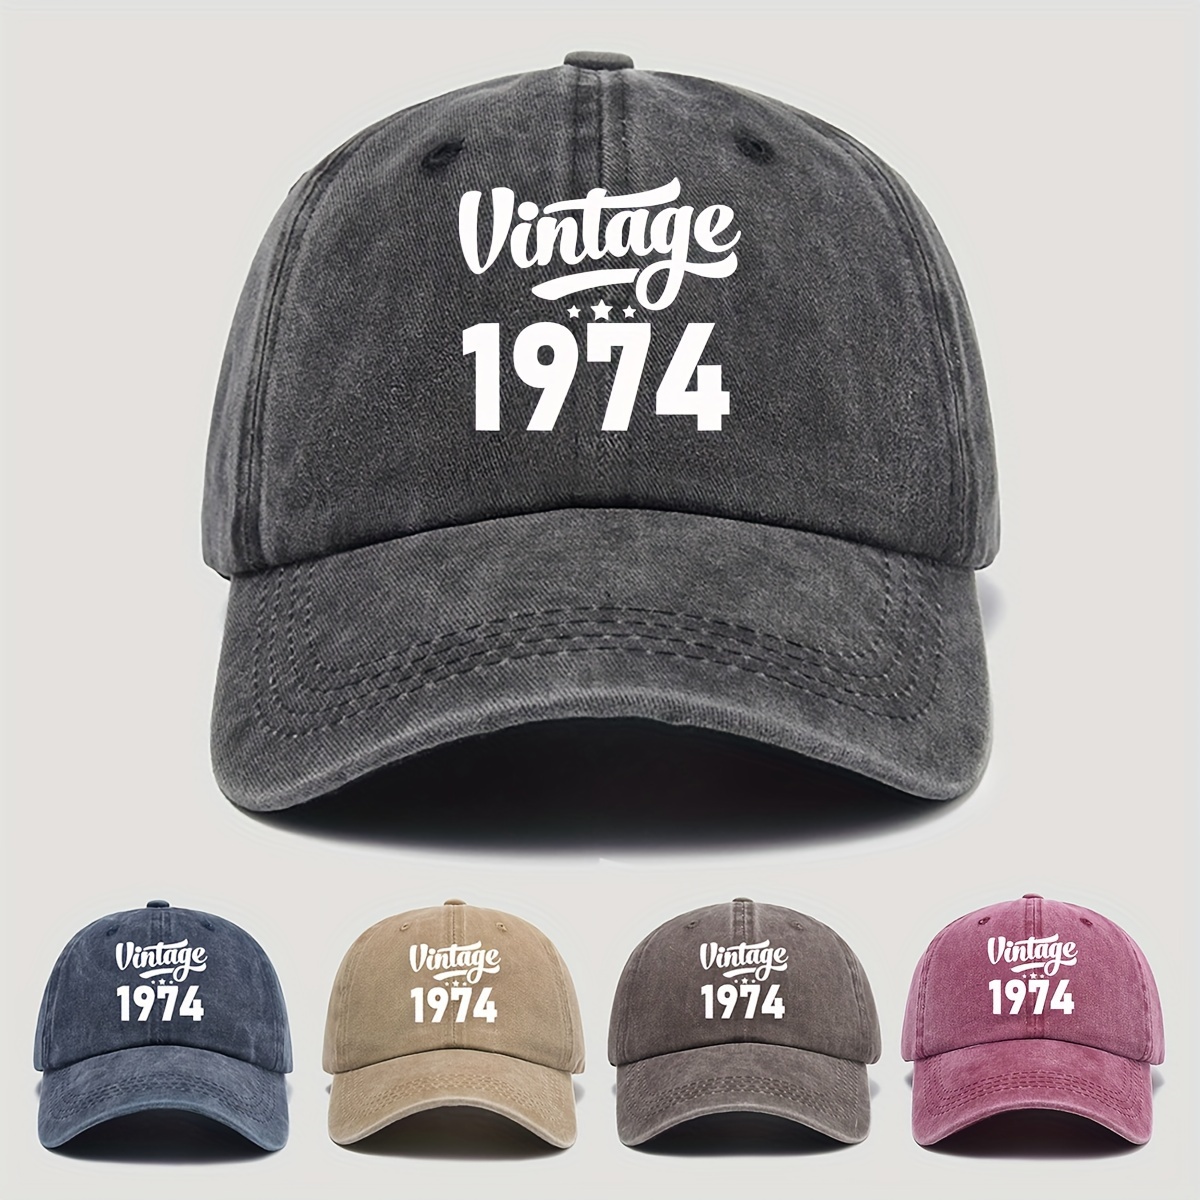 

Vintage 1974 Print Distressed Washed Baseball Cap, Unisex Casual Outdoor Sun Protection Trendy Hat, Adjustable Fit, Multiple Colors Available